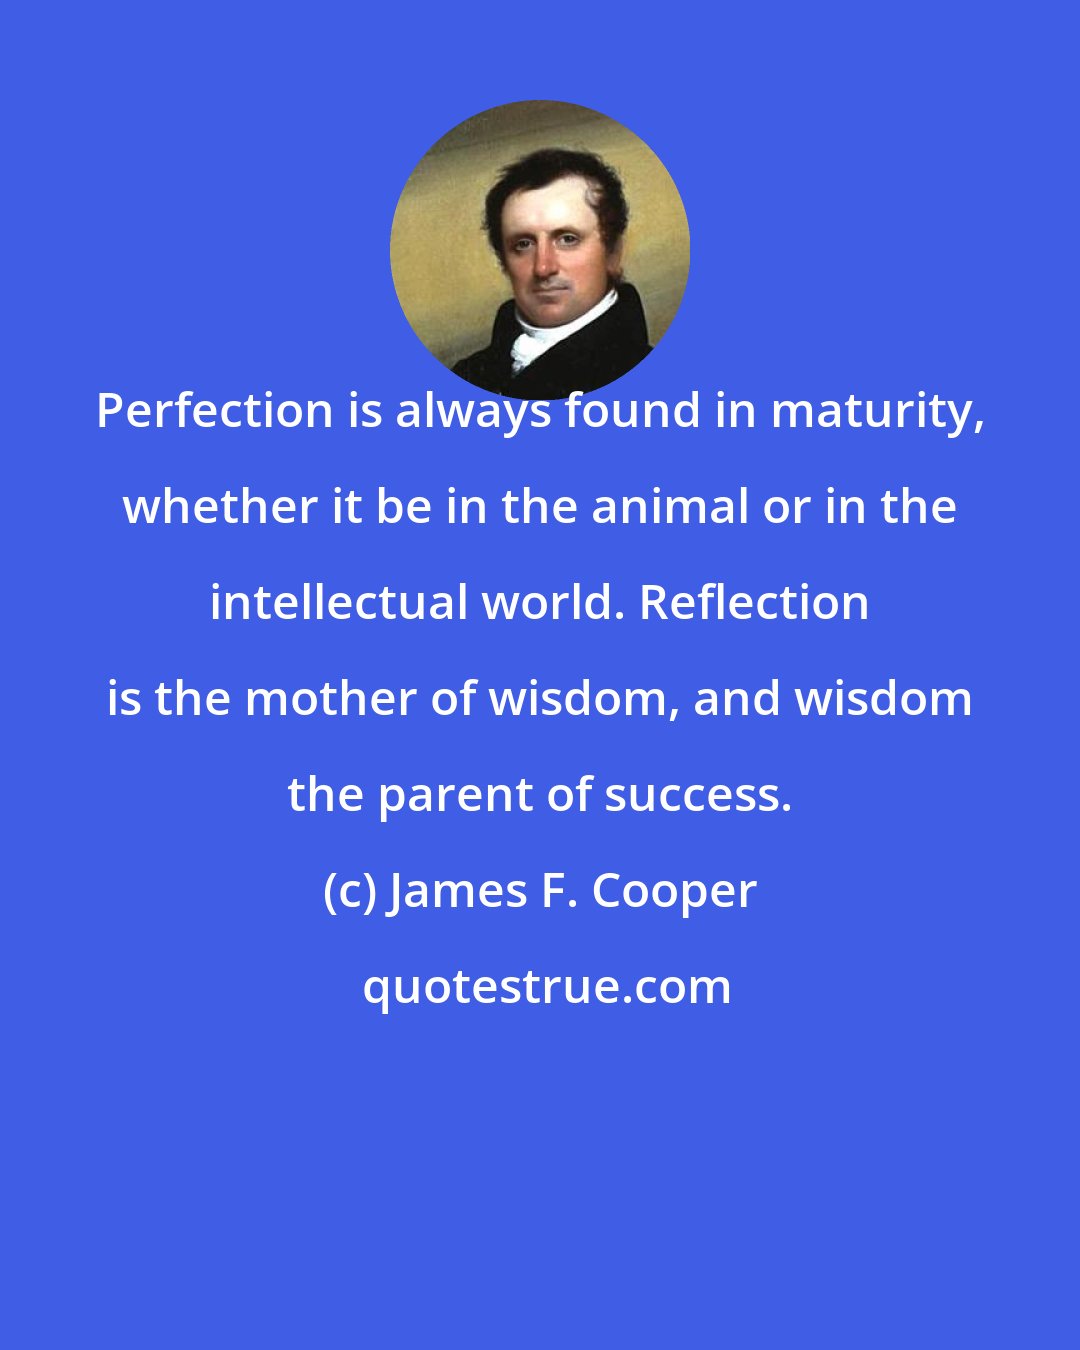 James F. Cooper: Perfection is always found in maturity, whether it be in the animal or in the intellectual world. Reflection is the mother of wisdom, and wisdom the parent of success.